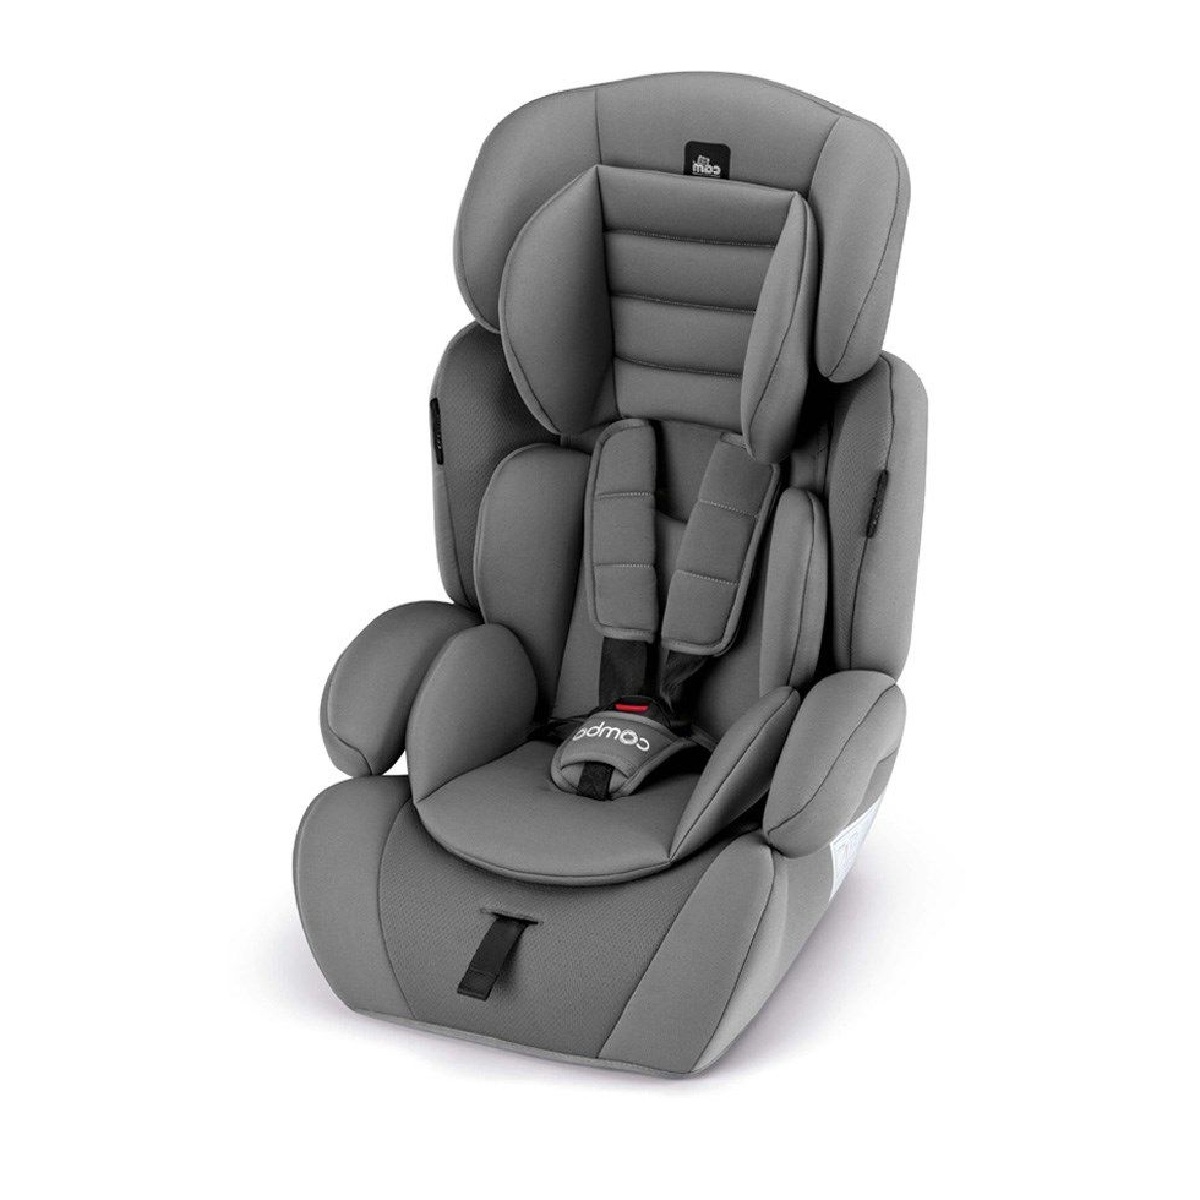 Cam - Combo Baby Car Seat, Outdoor, authentic, Car Seat Essential, travel go comportable for baby and Kids easy travel, protection for the head up to 1-3 years old 9-36 kg - Dark Gray